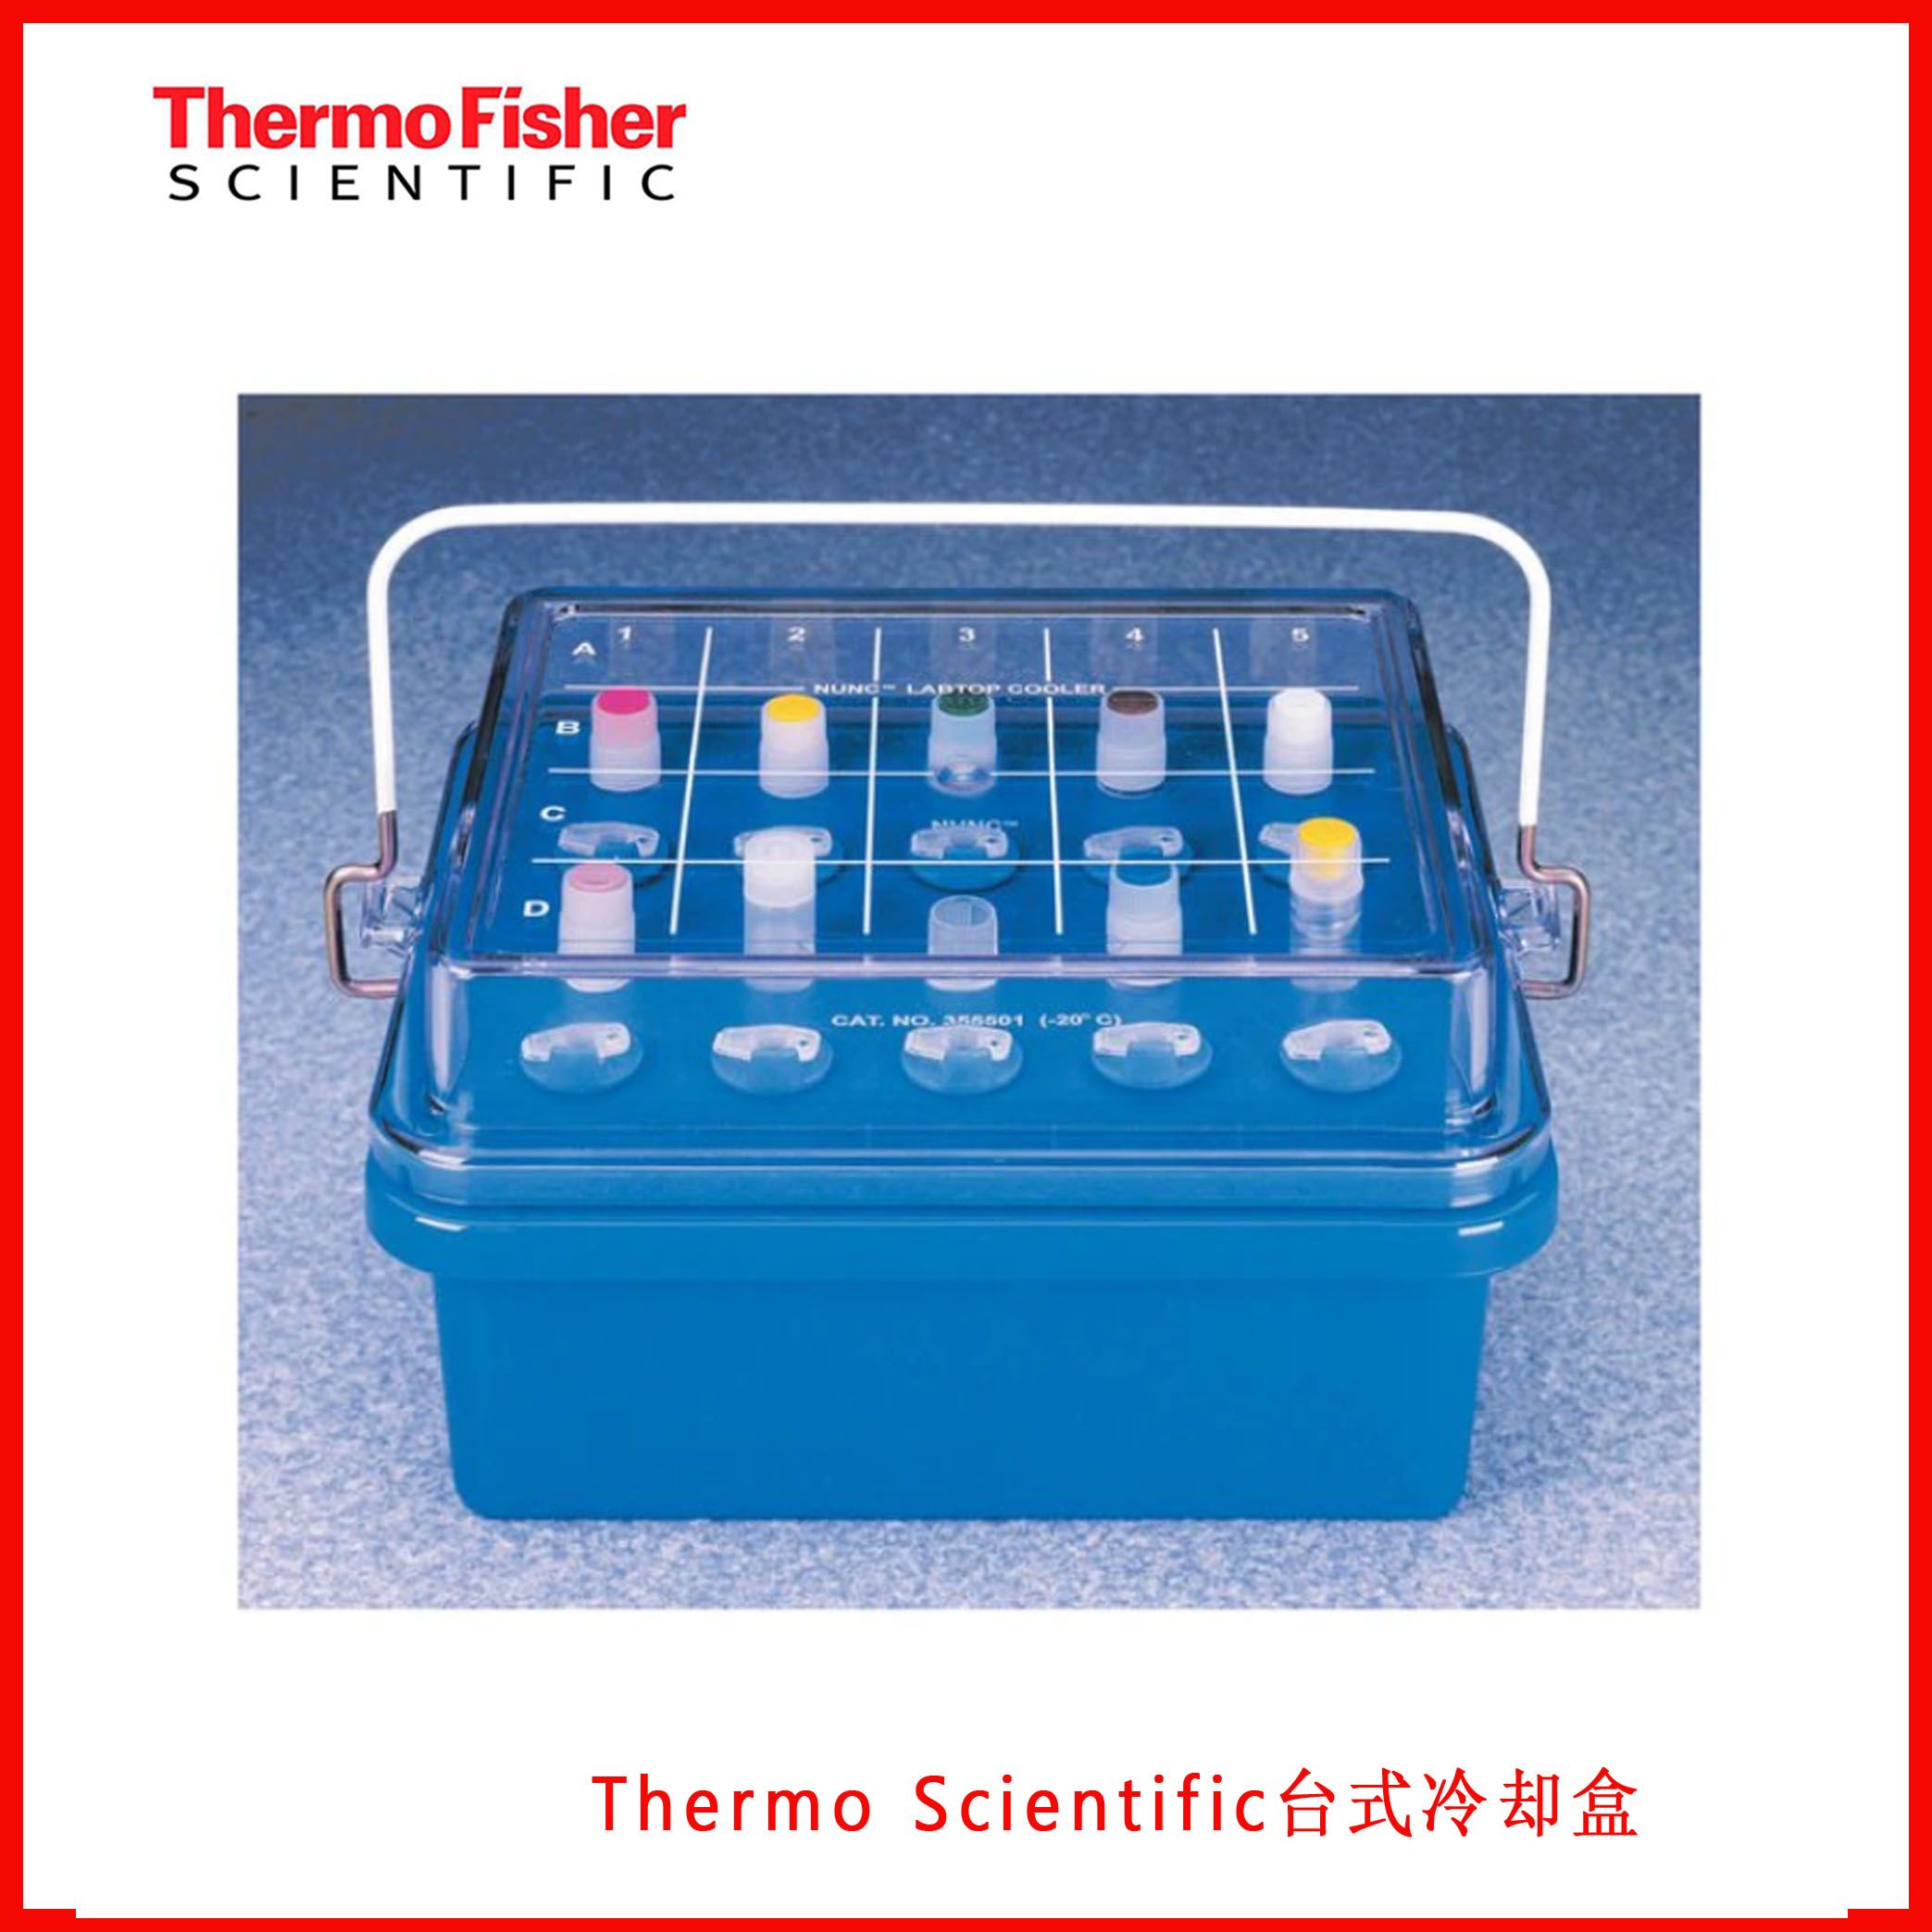 Thermo Scientific台式冷却盒5115-0012/ 5115-0032/ DS5116-0012/ DS5116-0032